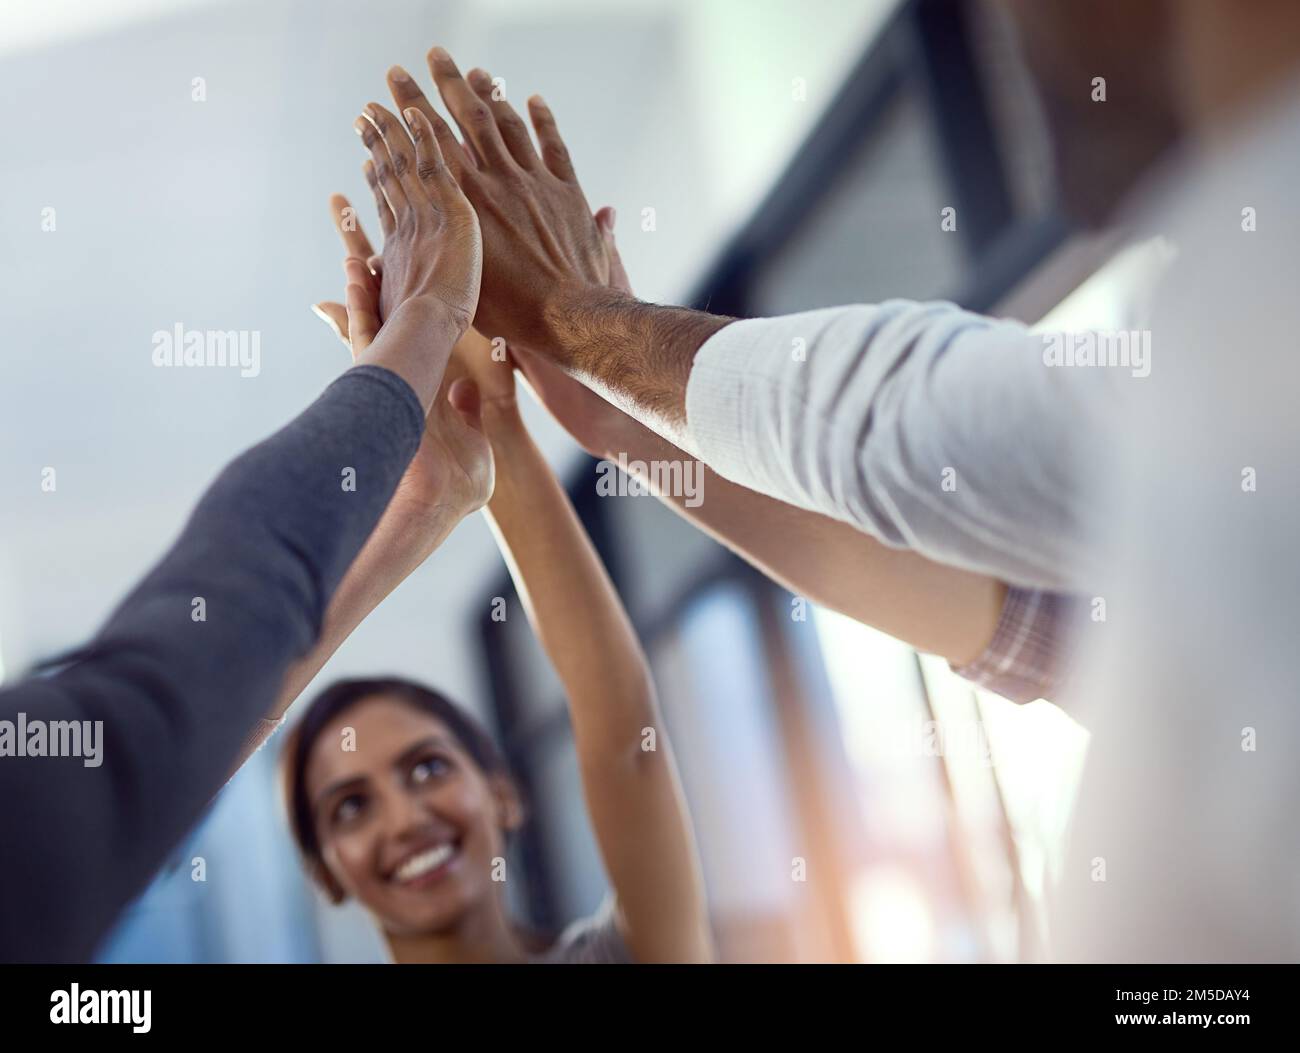 Awesome things are achieved with teamwork. a group of colleagues celebrating an achievement with a high five. Stock Photo